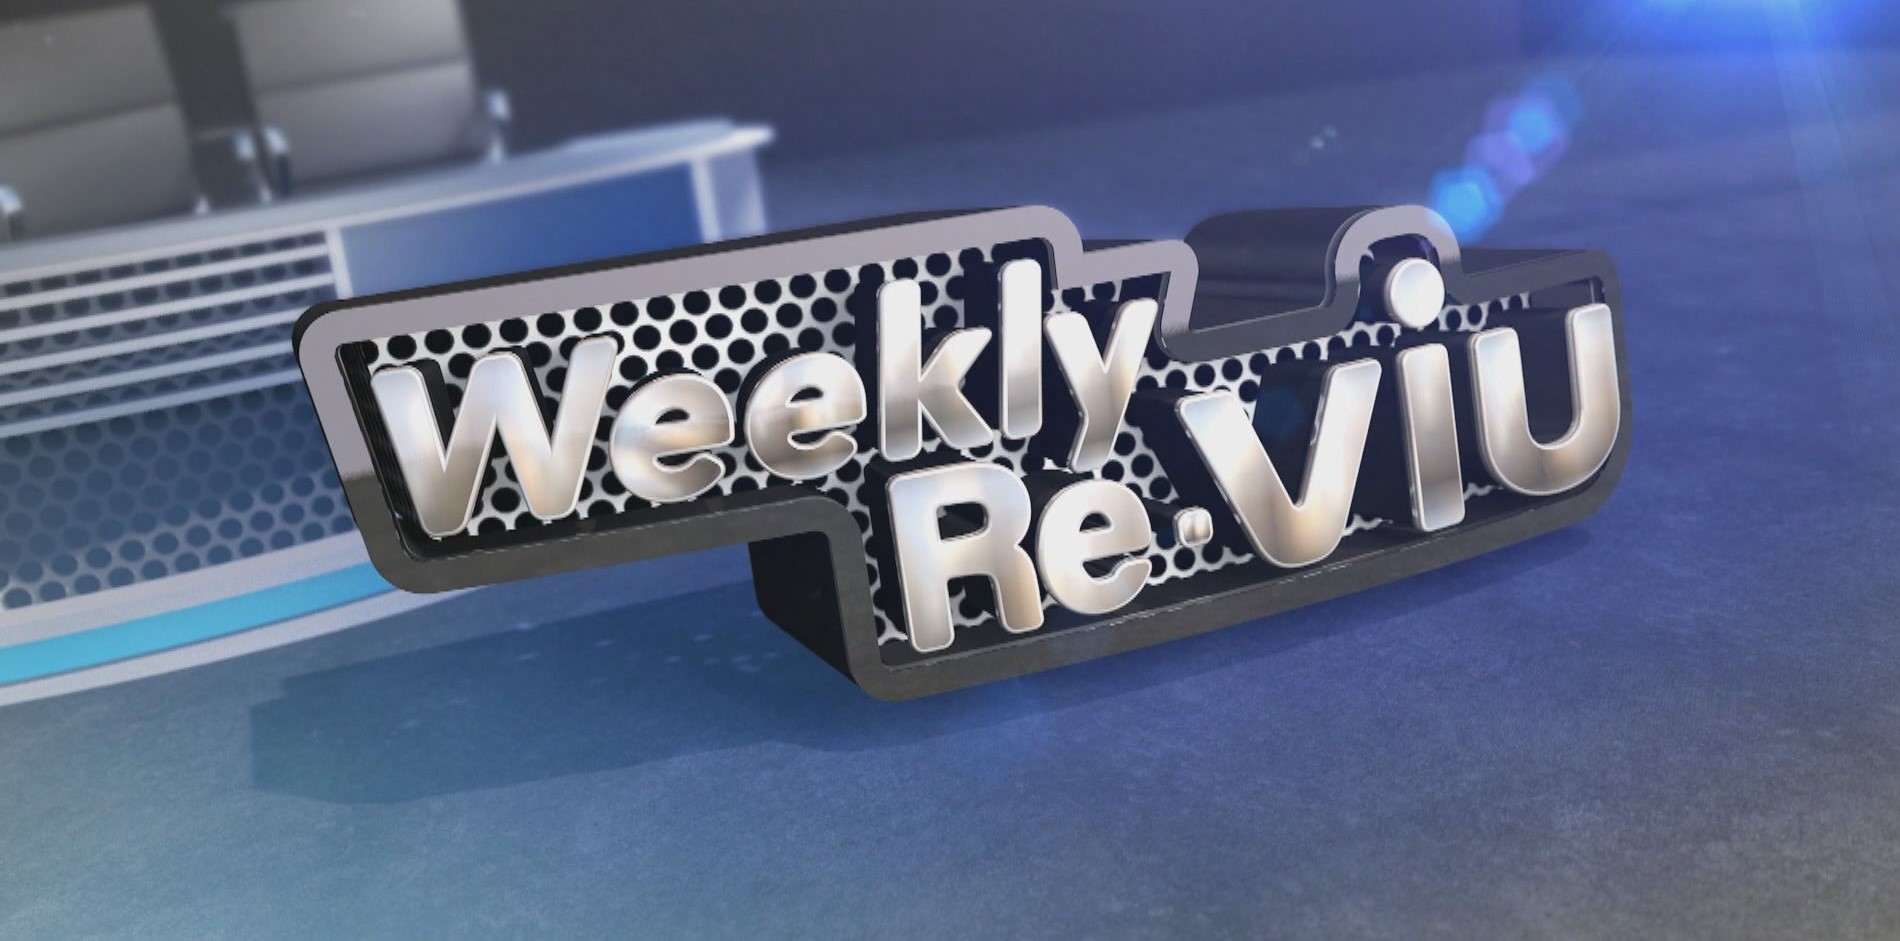 Weekly ReViu | Part Two - Story Roundup (20.8.2022)